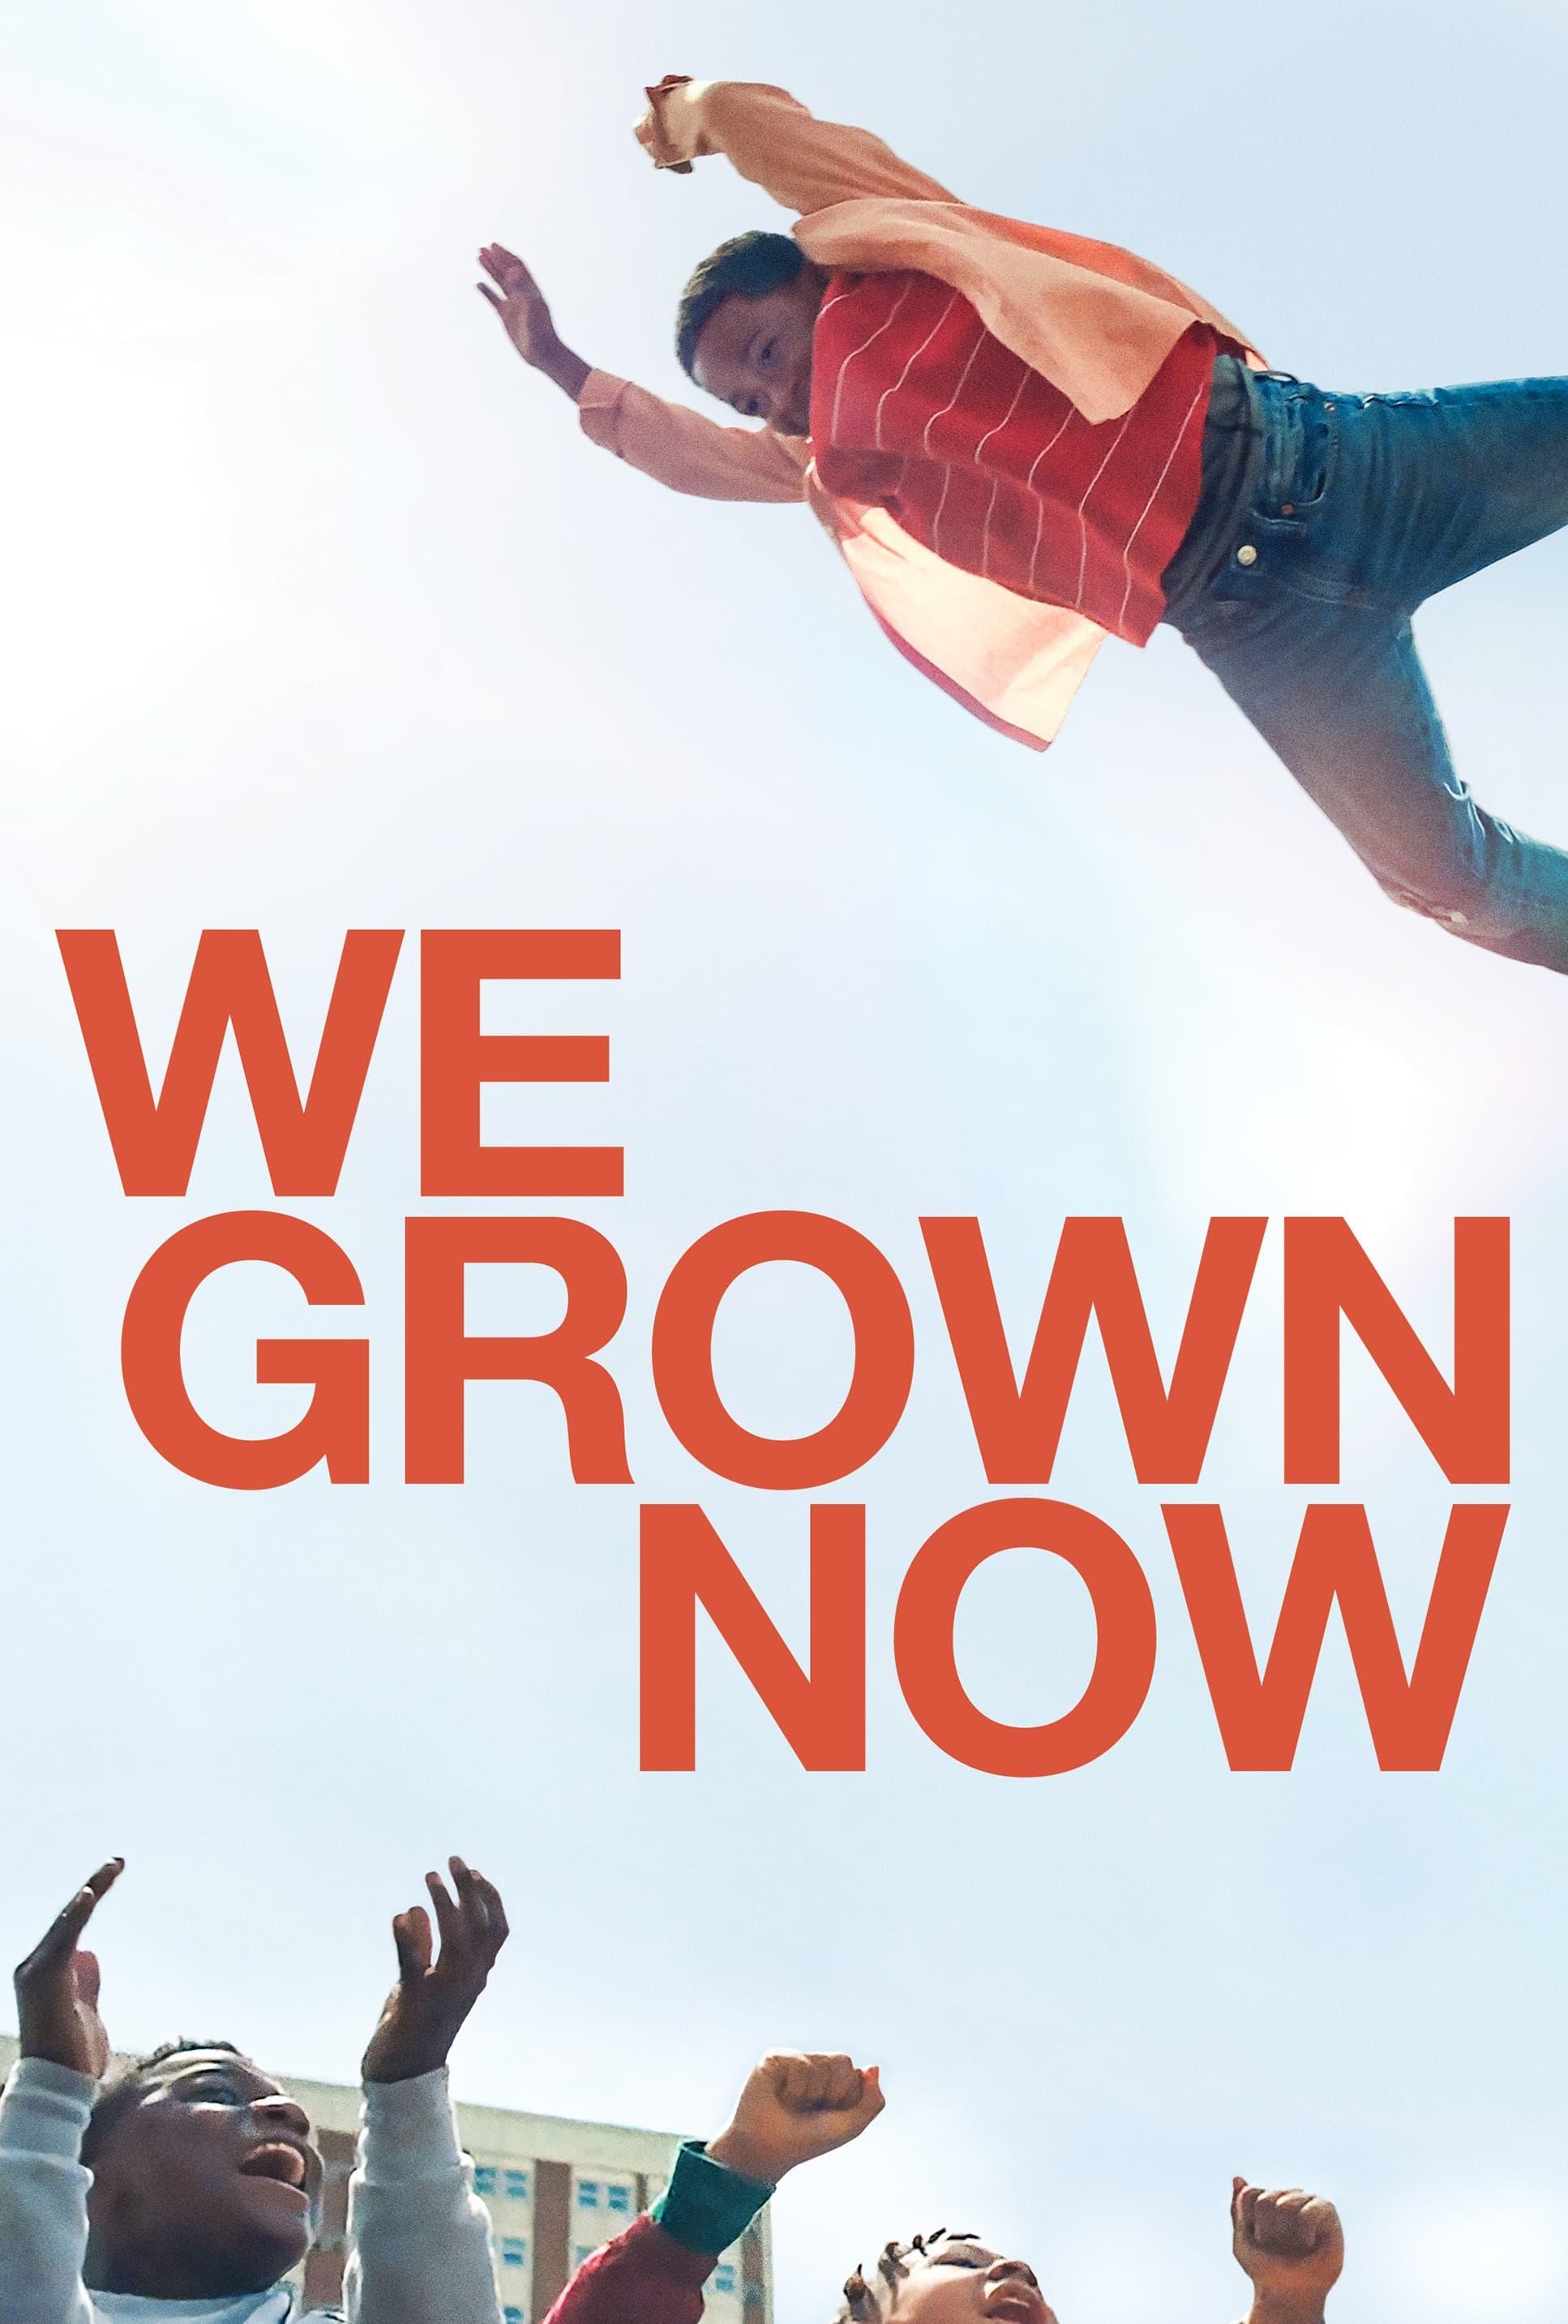 We Grown Now poster